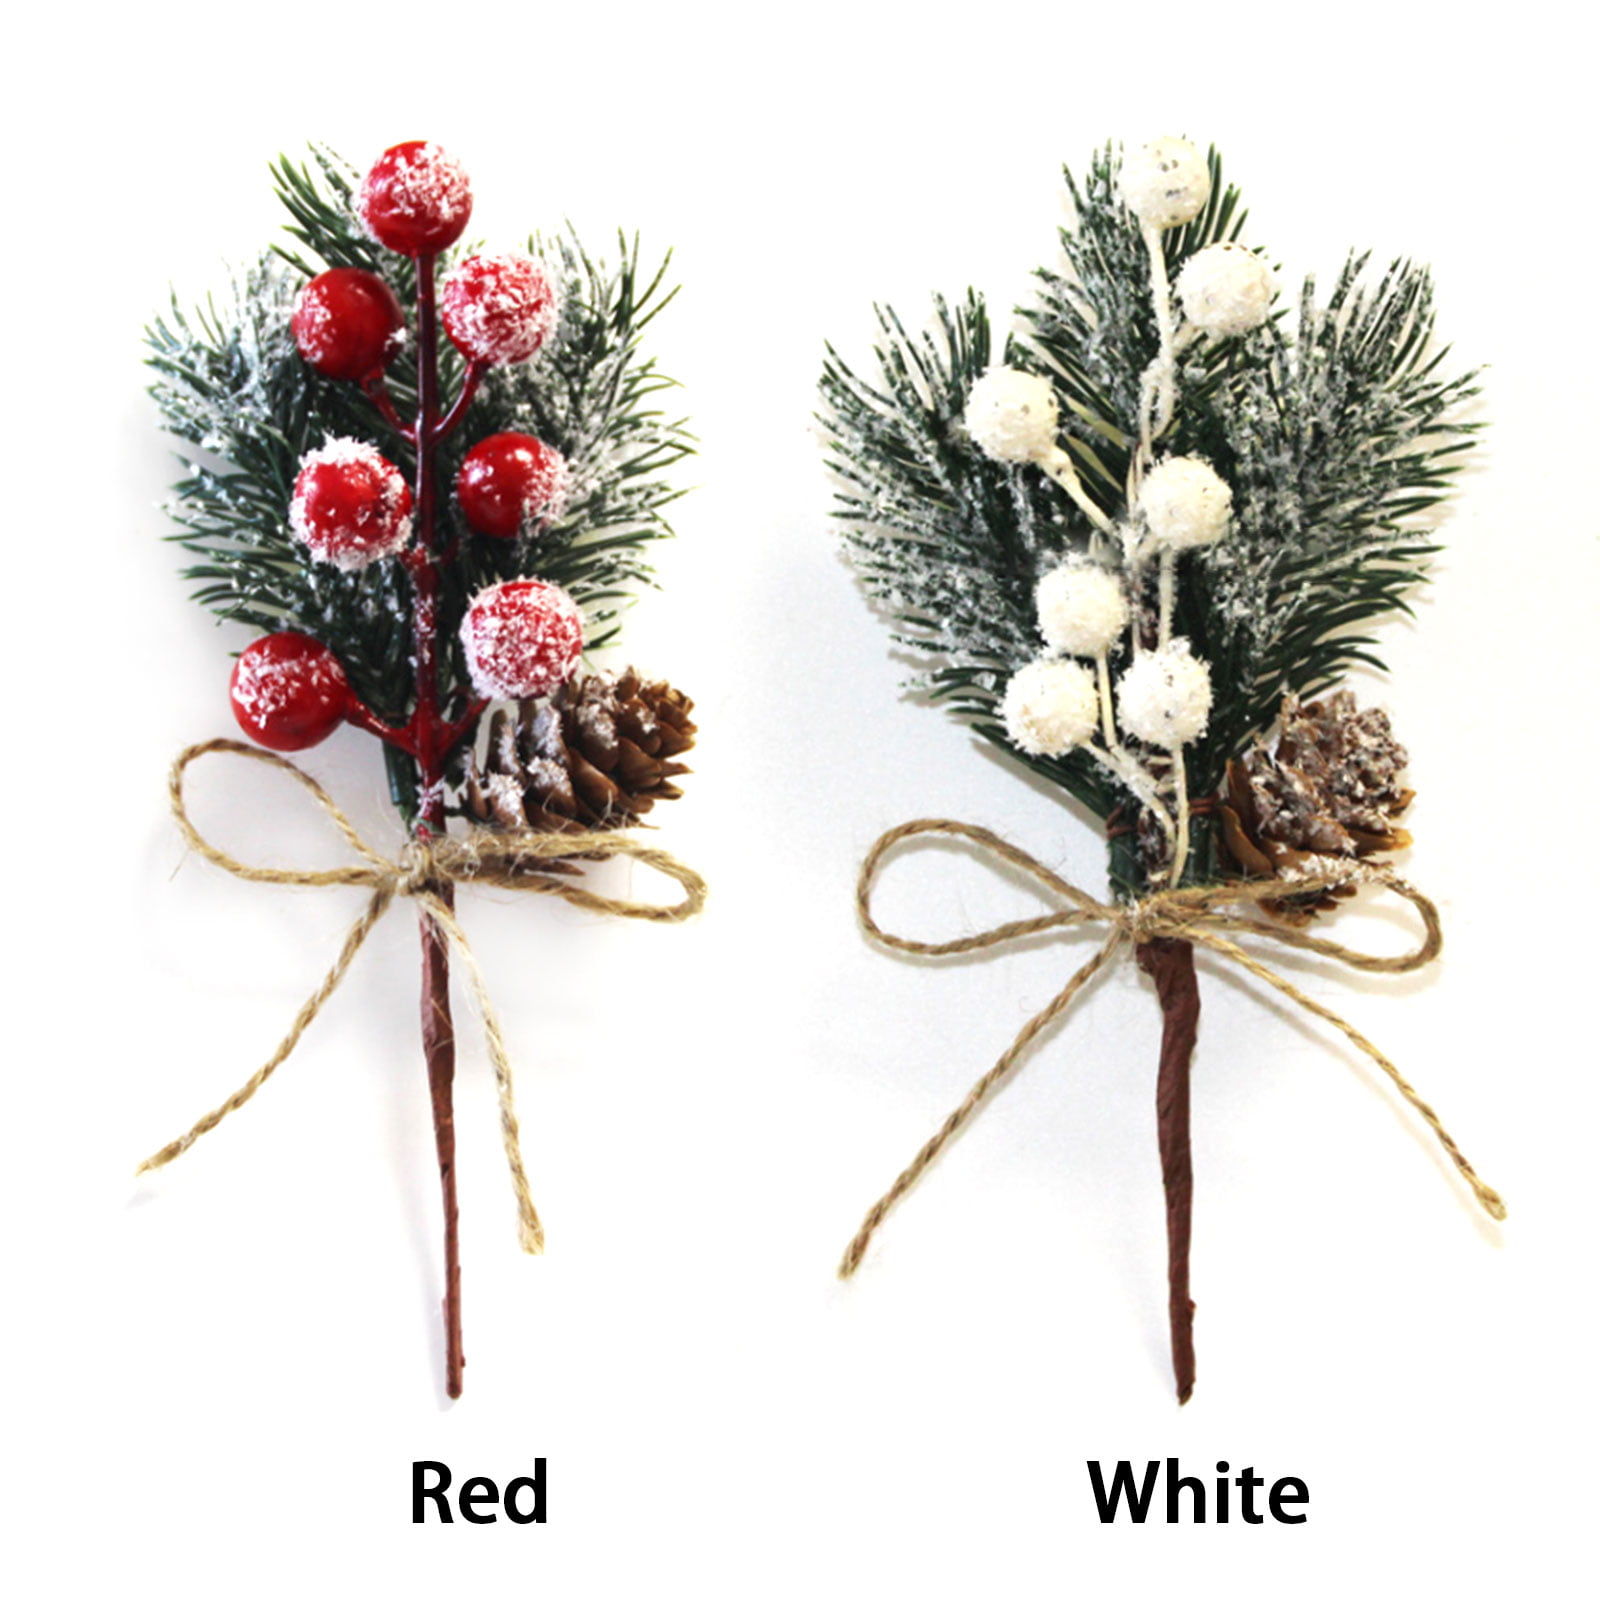 AXYLEX 16 Pcs Christmas Floral Picks and Sprays Pine Branches Decorations - Forsted Stems DIY Crafts Tree Berries Small Spot Evergreen Artificial